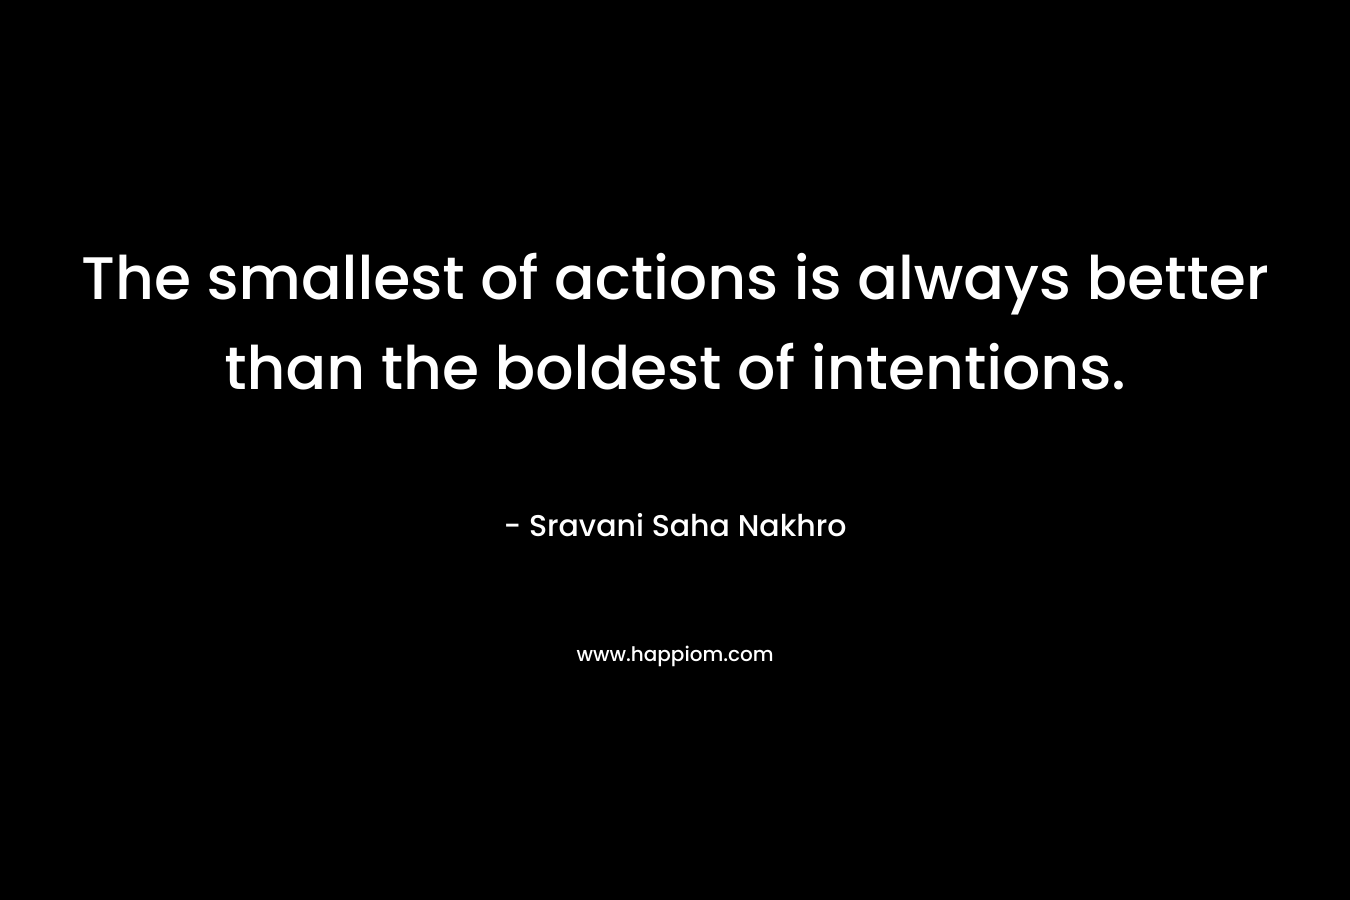 The smallest of actions is always better than the boldest of intentions. – Sravani Saha Nakhro